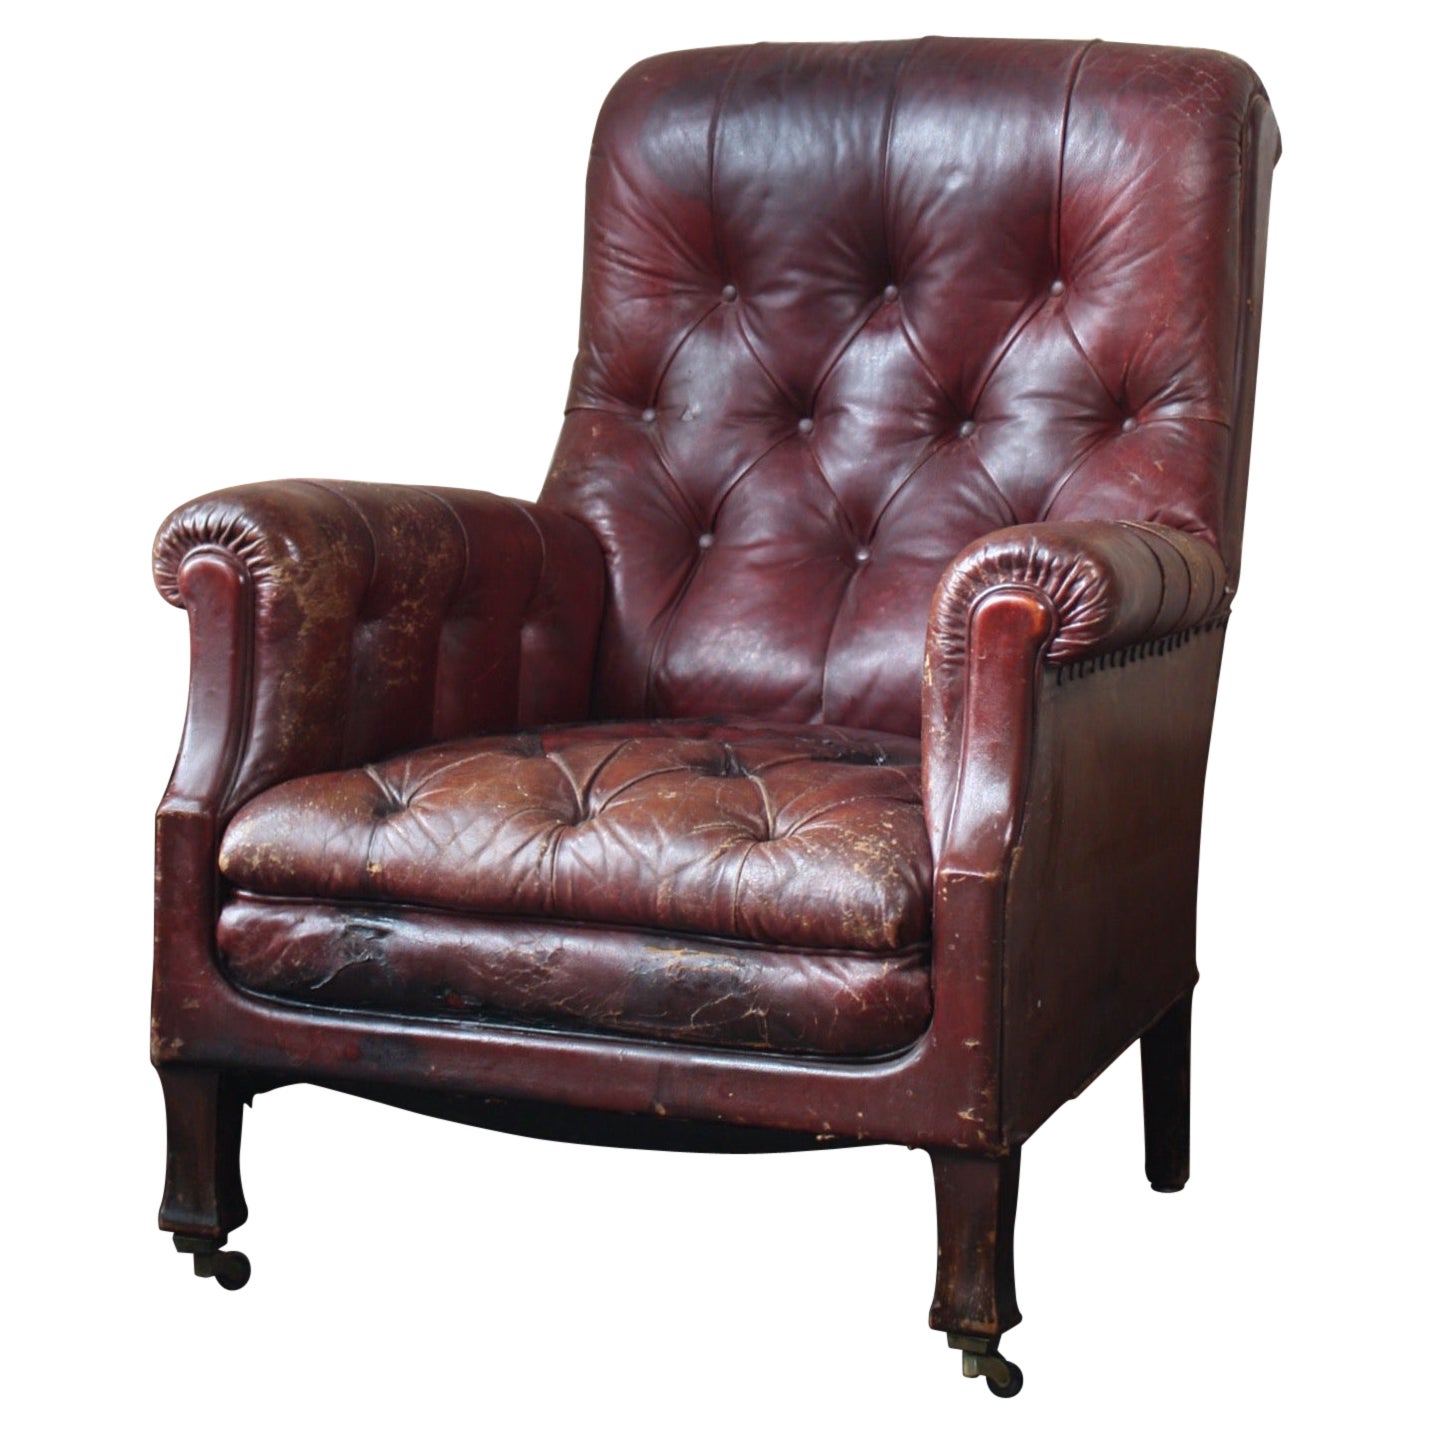 A.I.C. Early 20th C English Country House Style Red Maroon Leather Buttoned Armchair